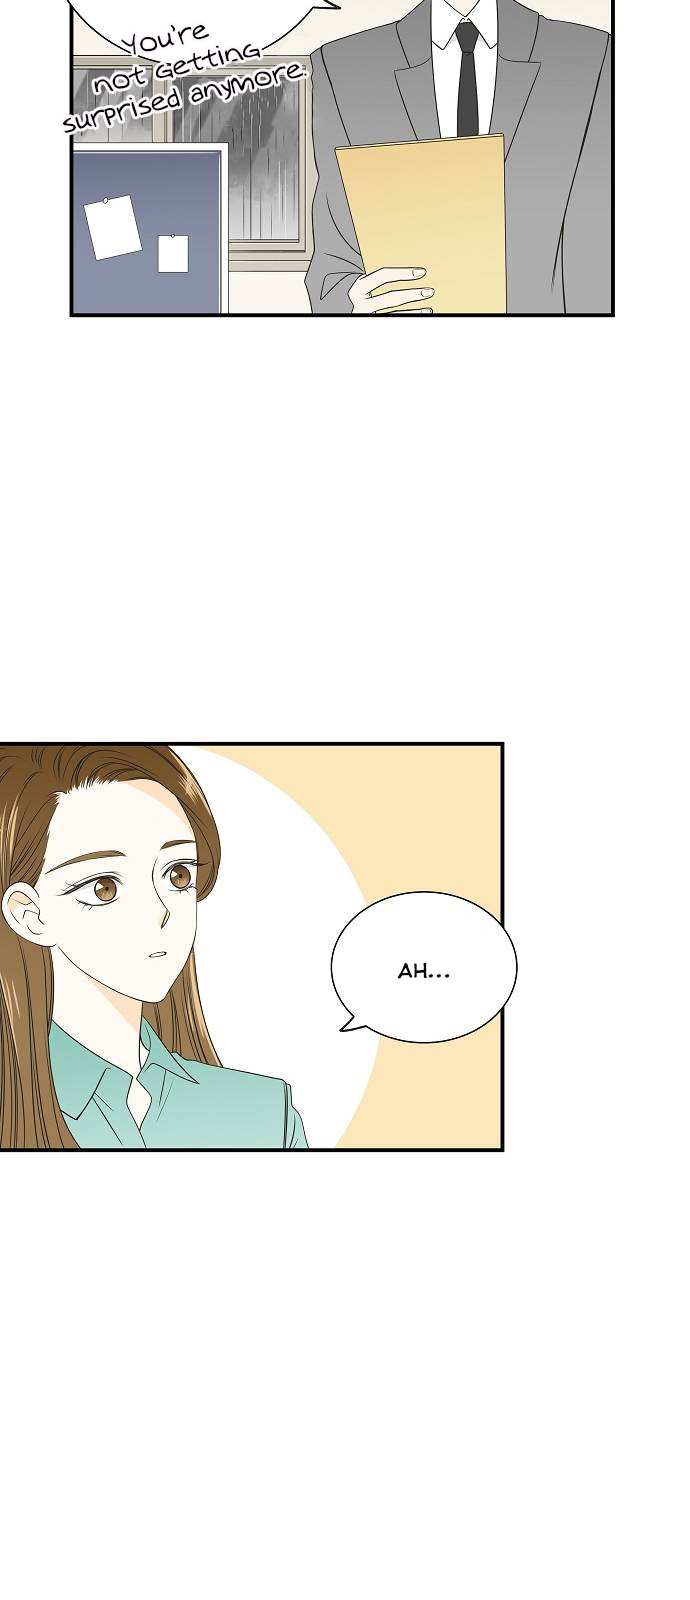 It Is My First Love Vol. 1 Ch. 12